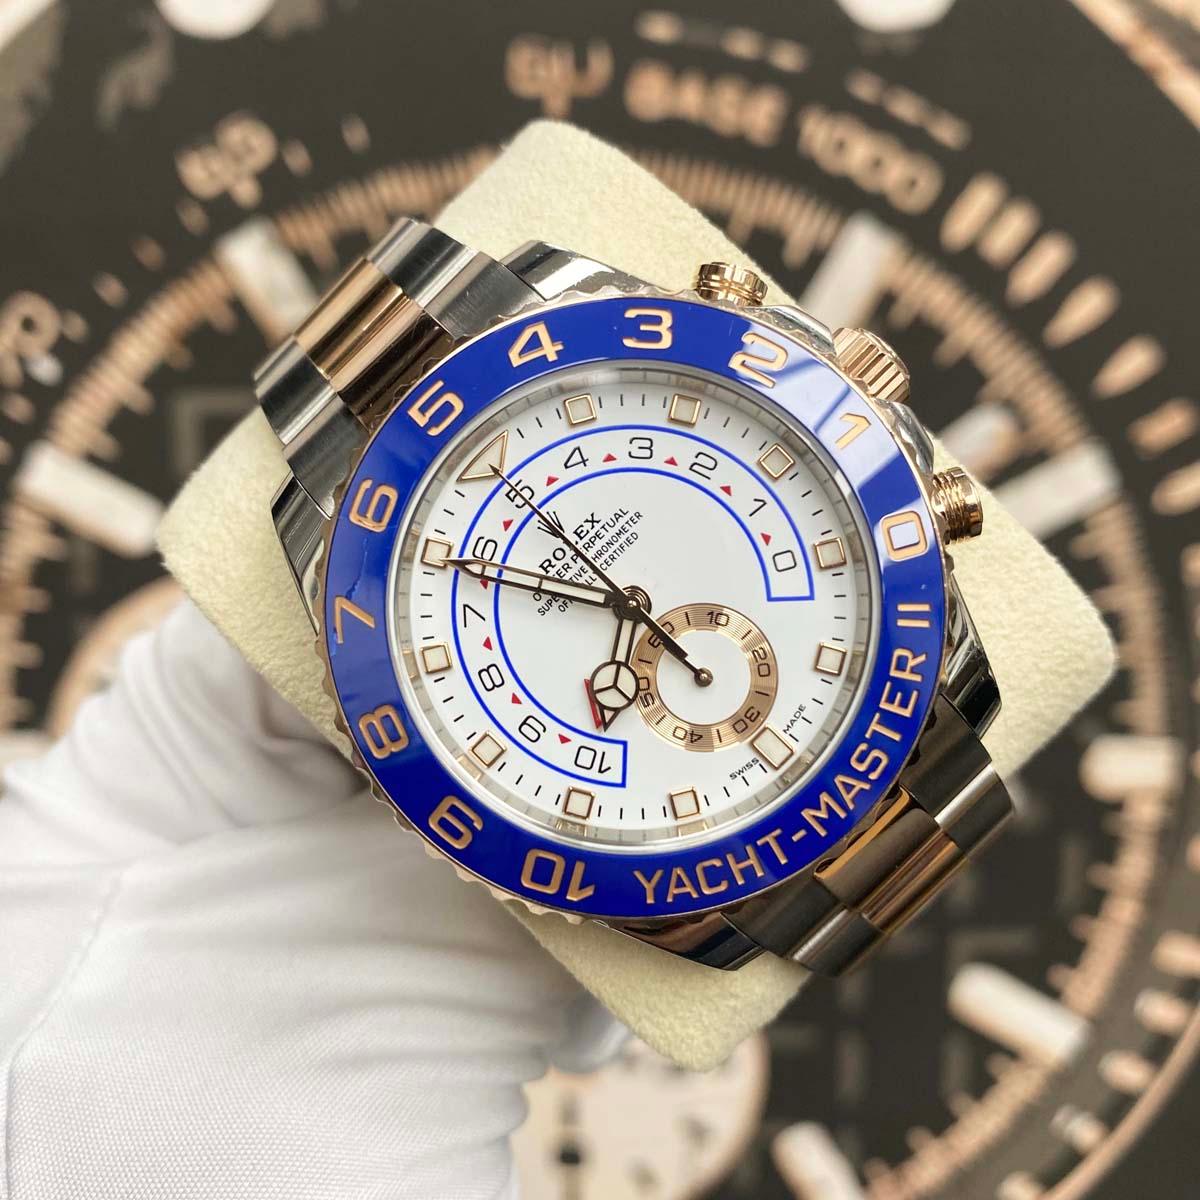 Rolex Yacht-Master II Newer Style Mercedes Hands 44mm 116681 White Dial Pre-Owned - Gotham Trading 